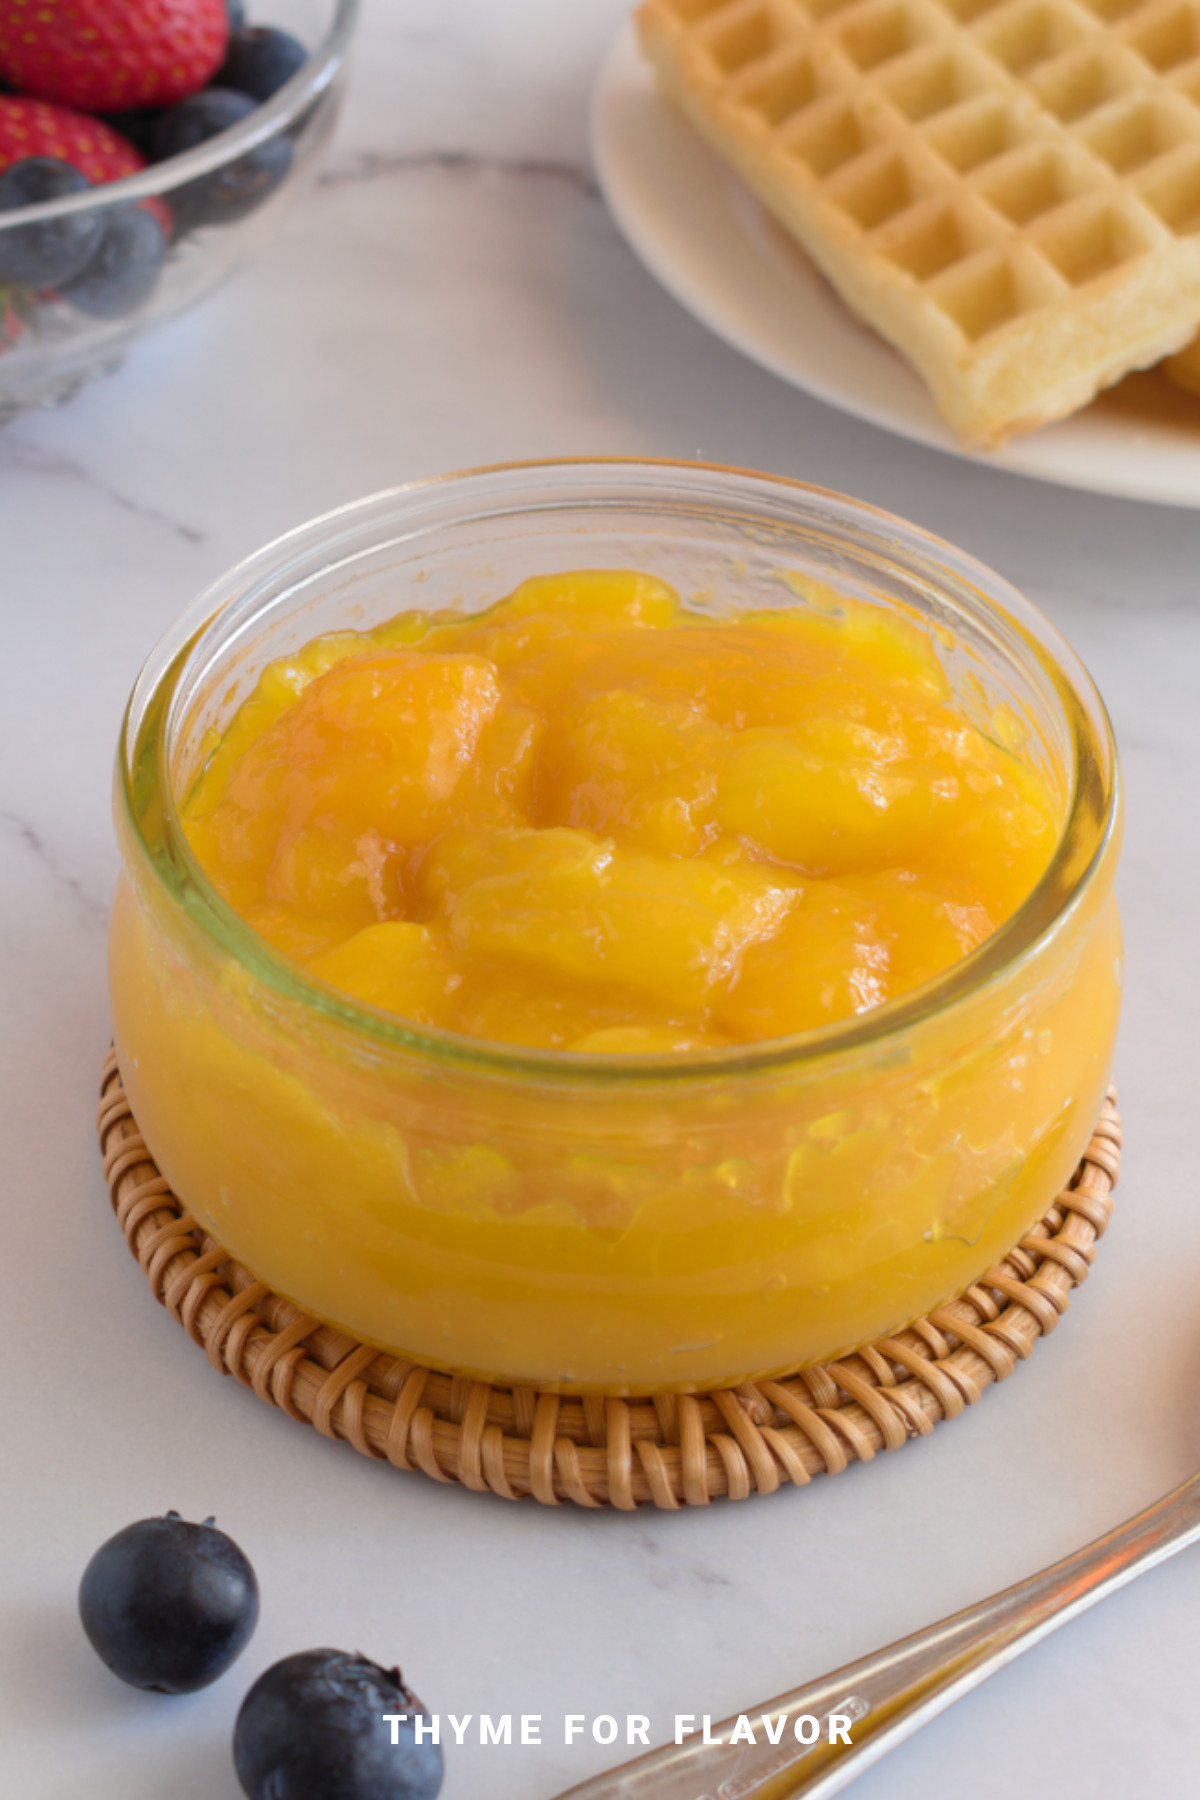 Mango compote in a round glass container.